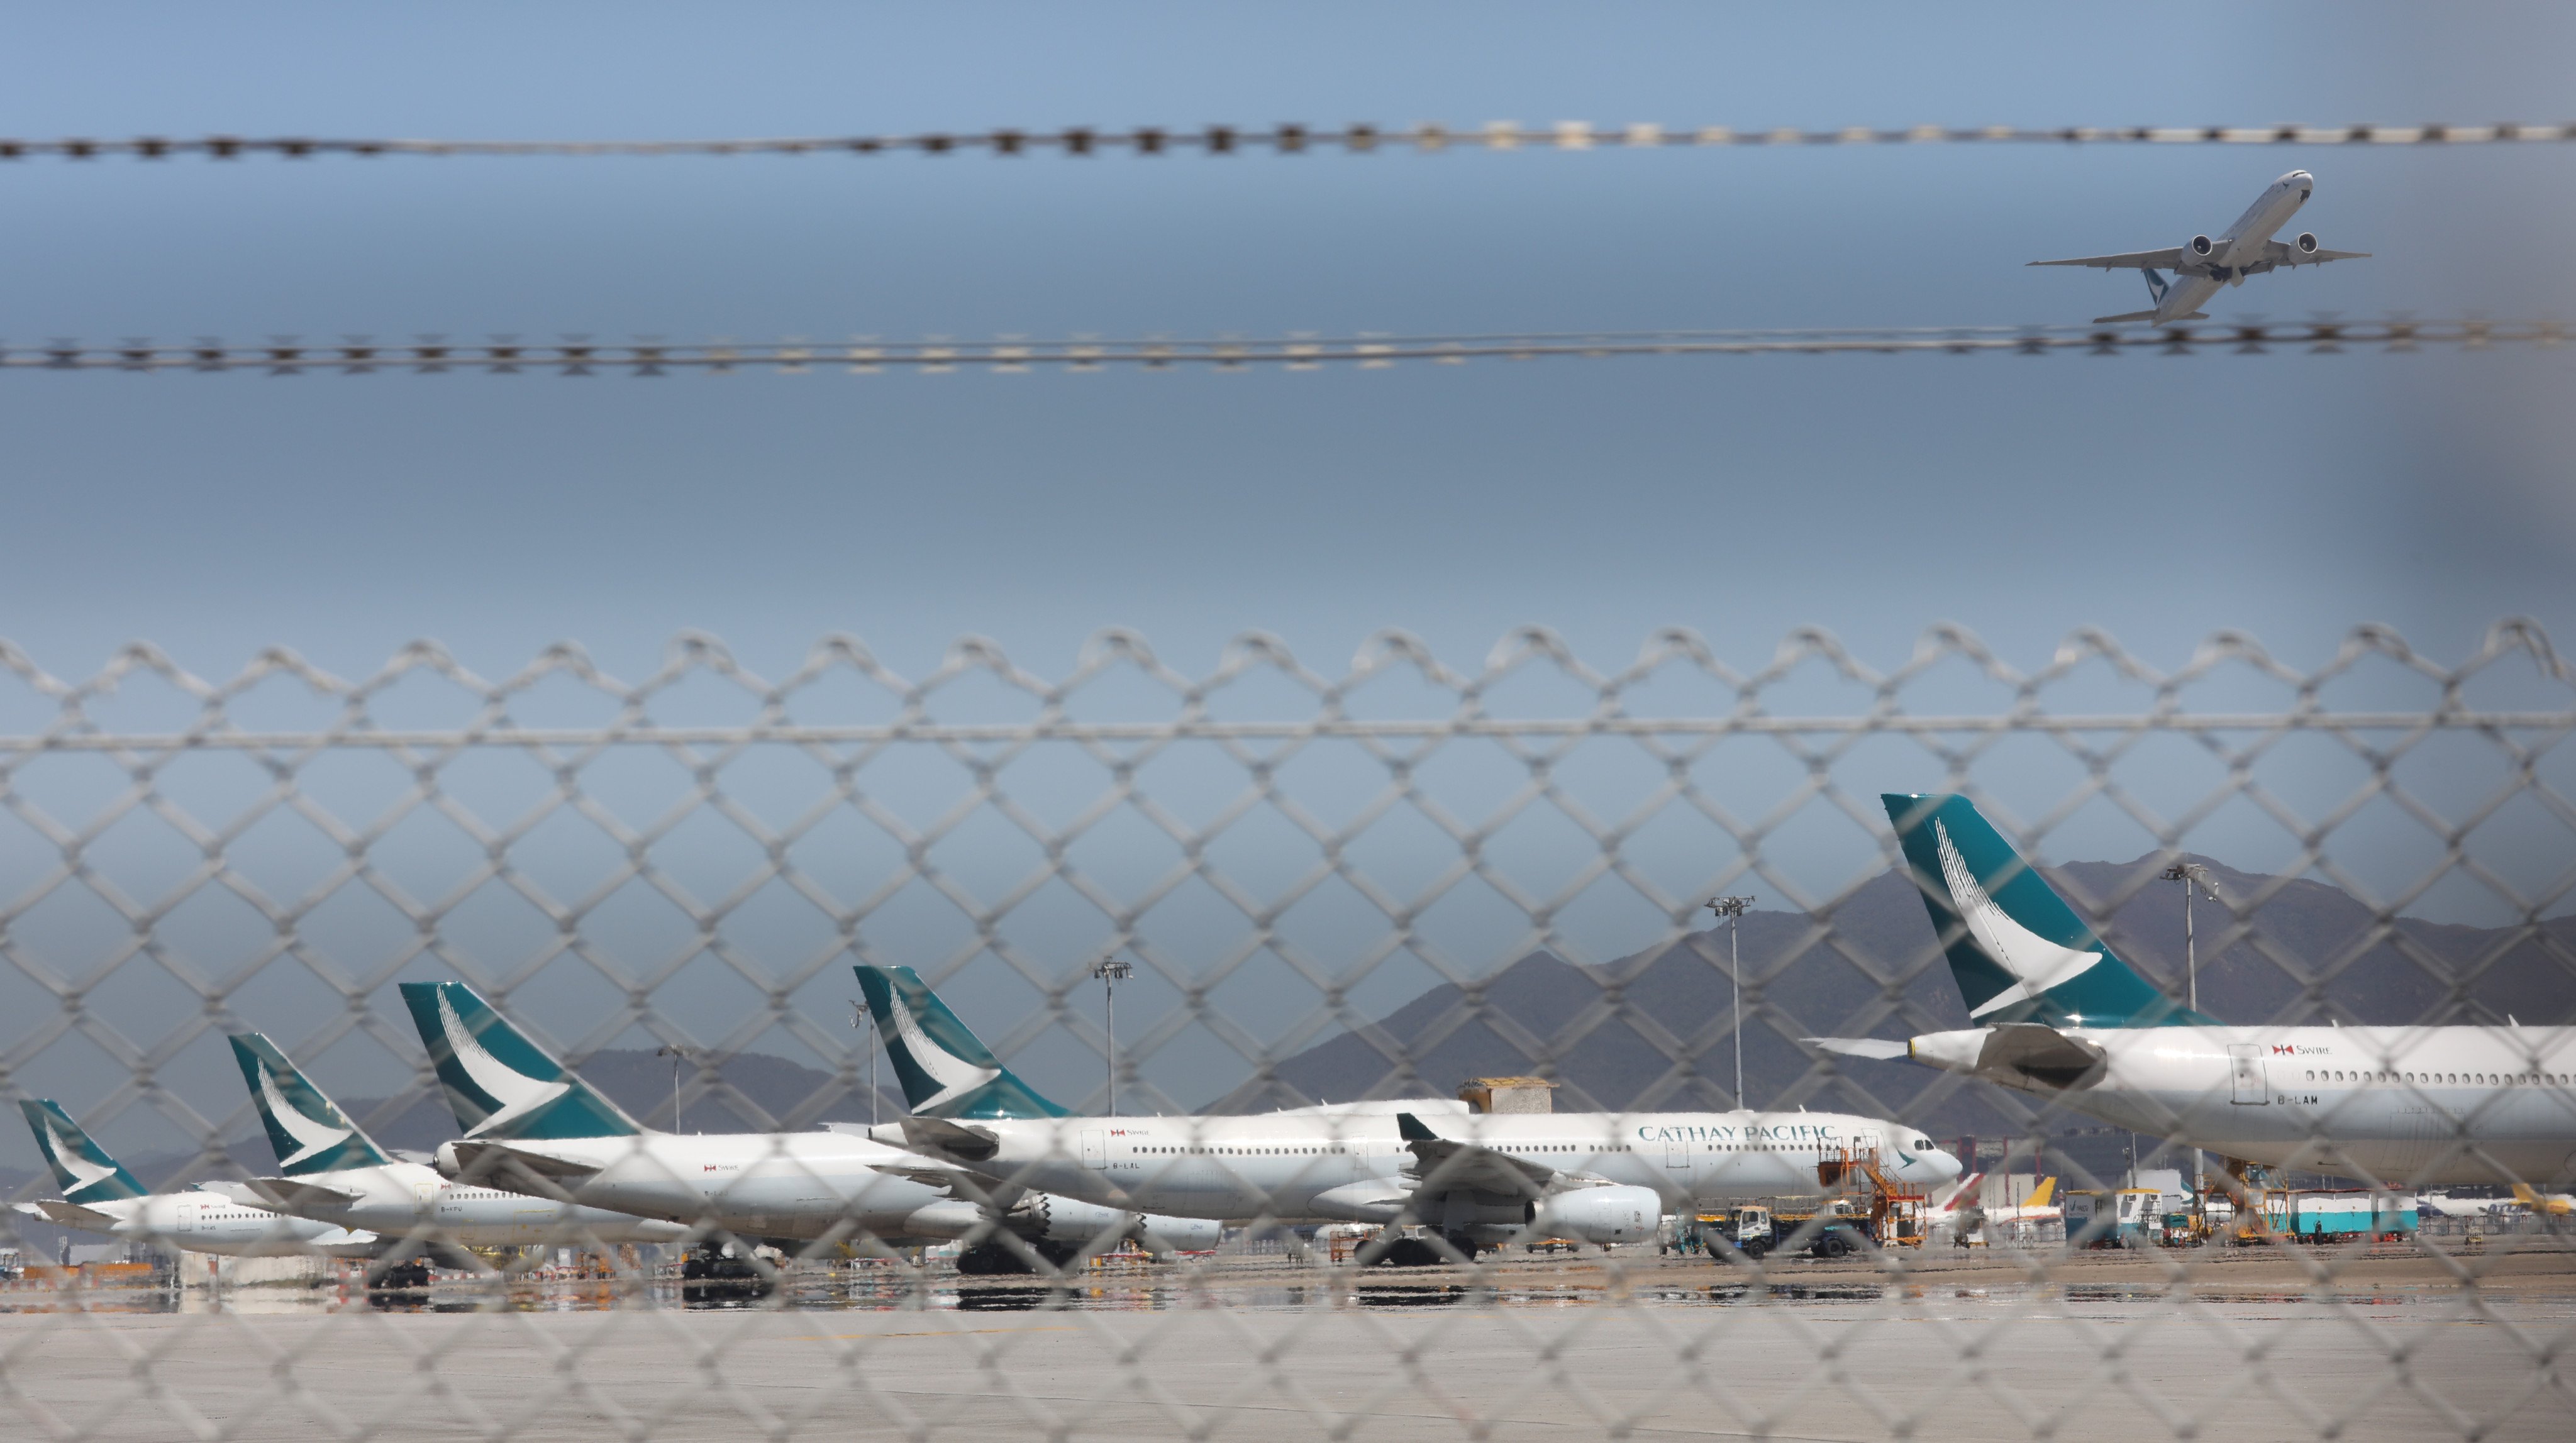 Cathay Pacific aims to get capacity back to 70 per cent of pre-pandemic levels next year. Photo: Yik Yeung -man